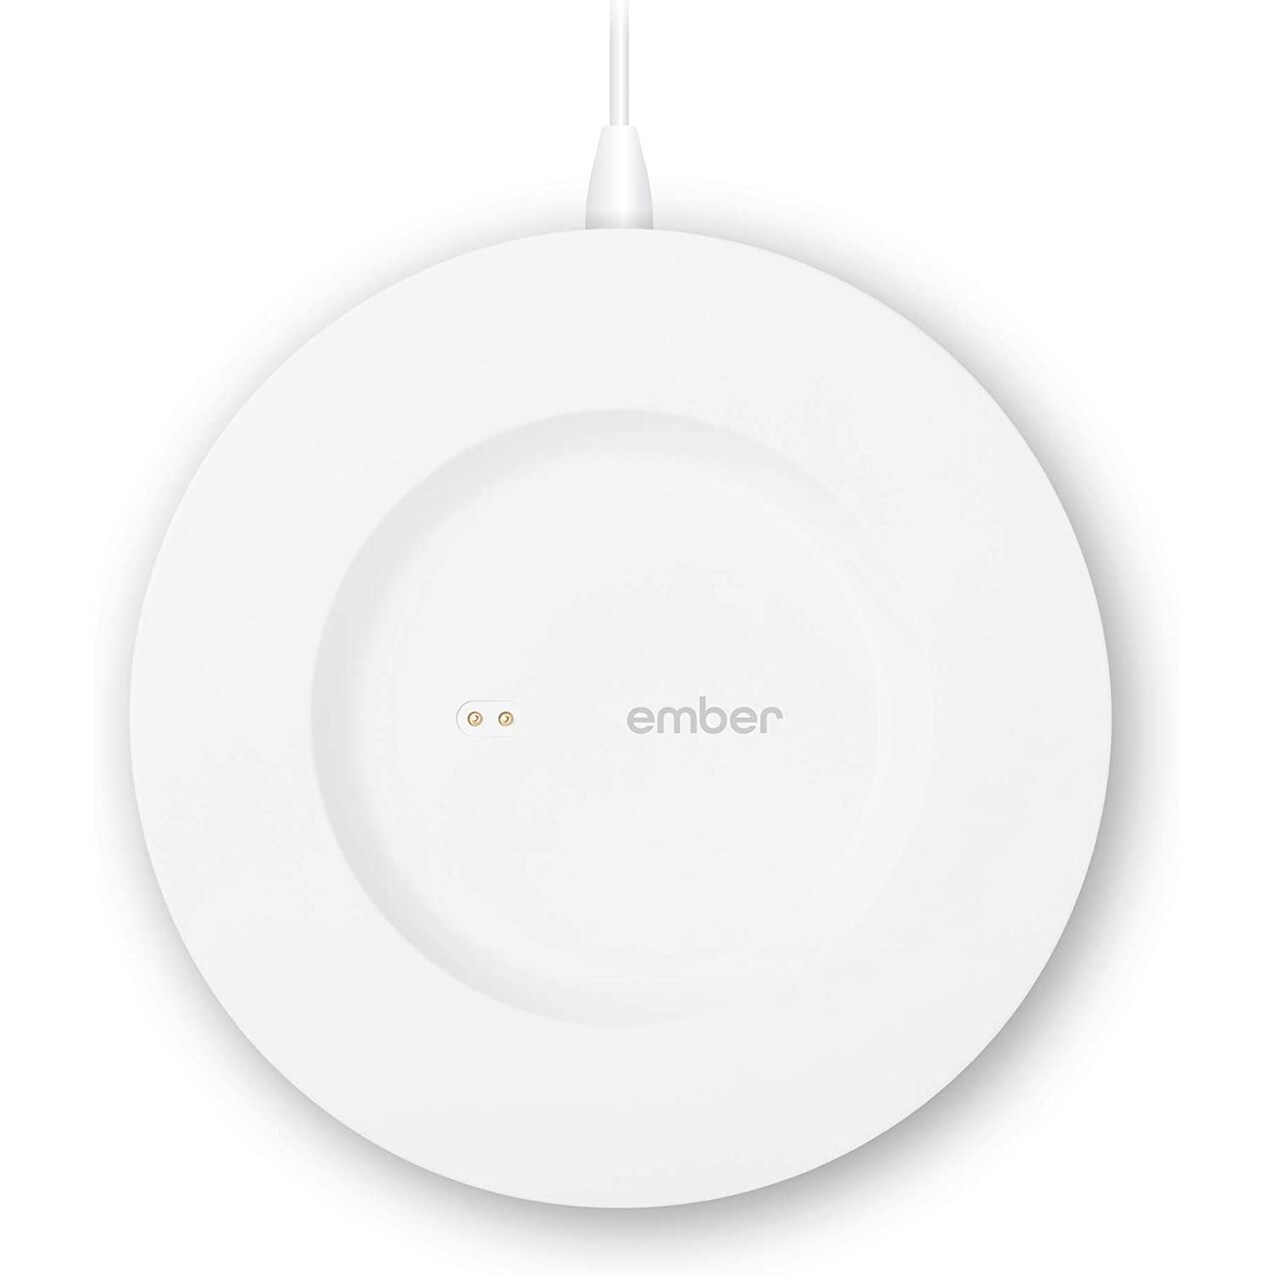 https://ak1.ostkcdn.com/images/products/is/images/direct/33153c7532b9eb57d2b1af286e1c2c22b4d49352/Ember-Charging-Coaster-2%2C-White---for-use-with-Ember-Temperature-Control-Smart-Mug.jpg